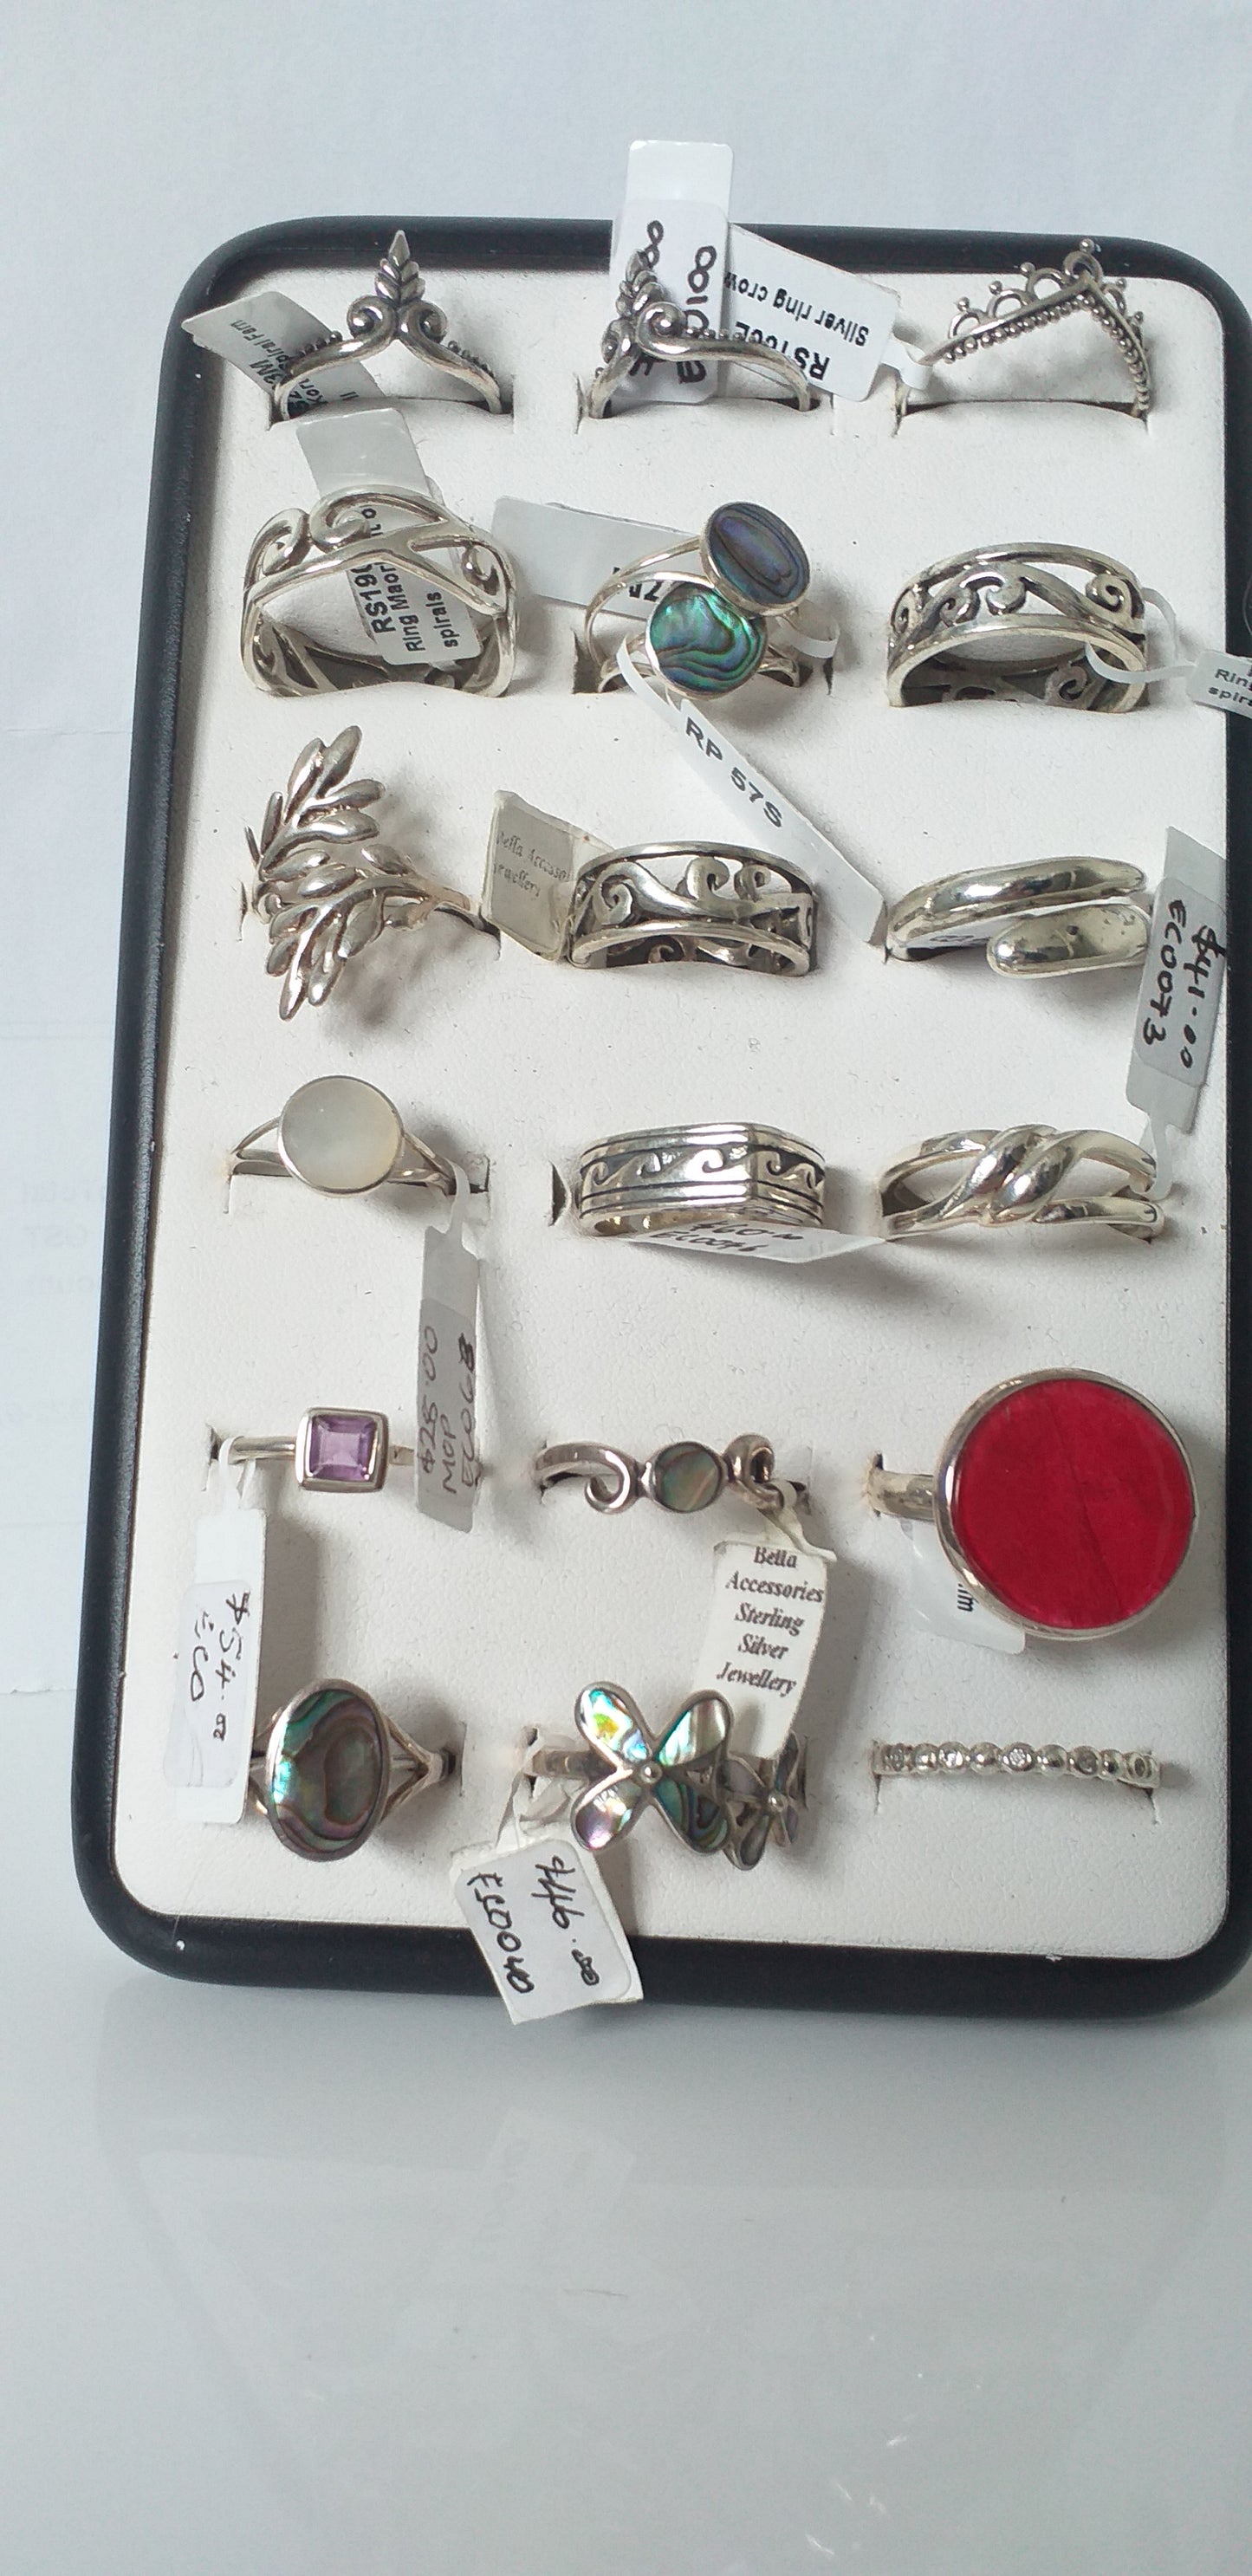 Rings, Selection of Sterling Silver Rings - Broadfield Flowers Florist Lincoln